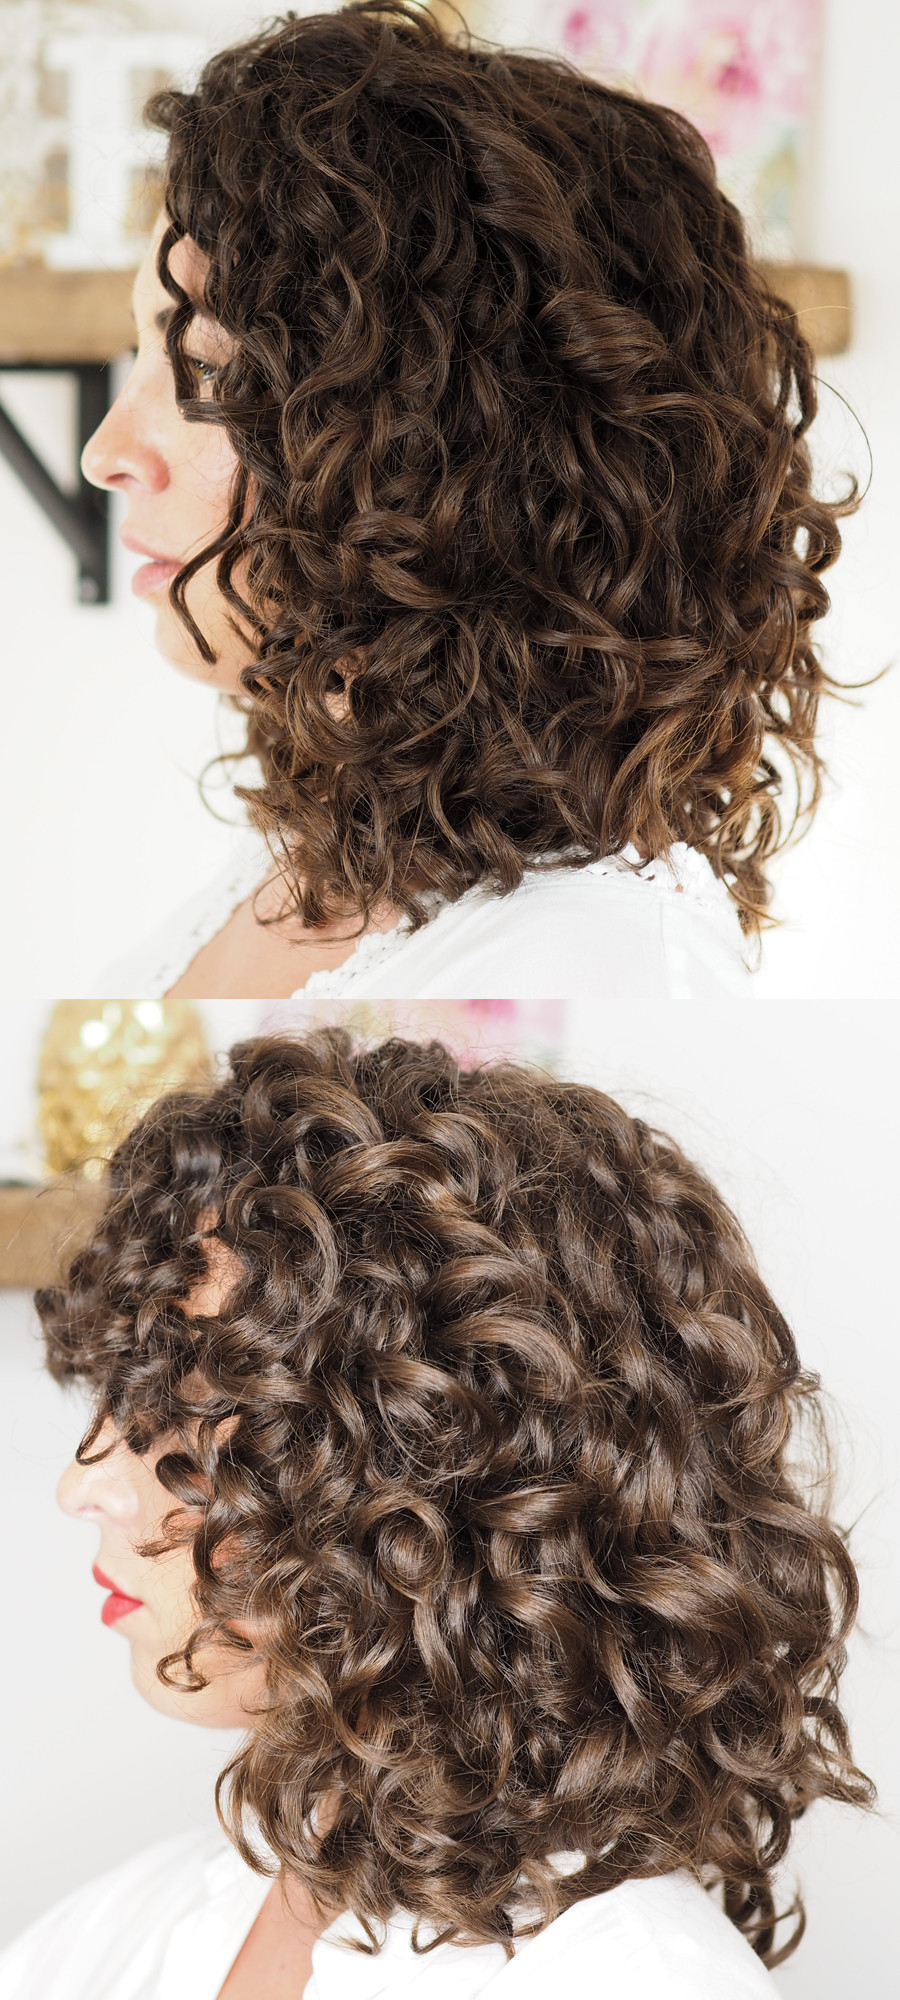 DIY Curly Haircut
 DIY Cut for Shape & Volume Curly Cailn